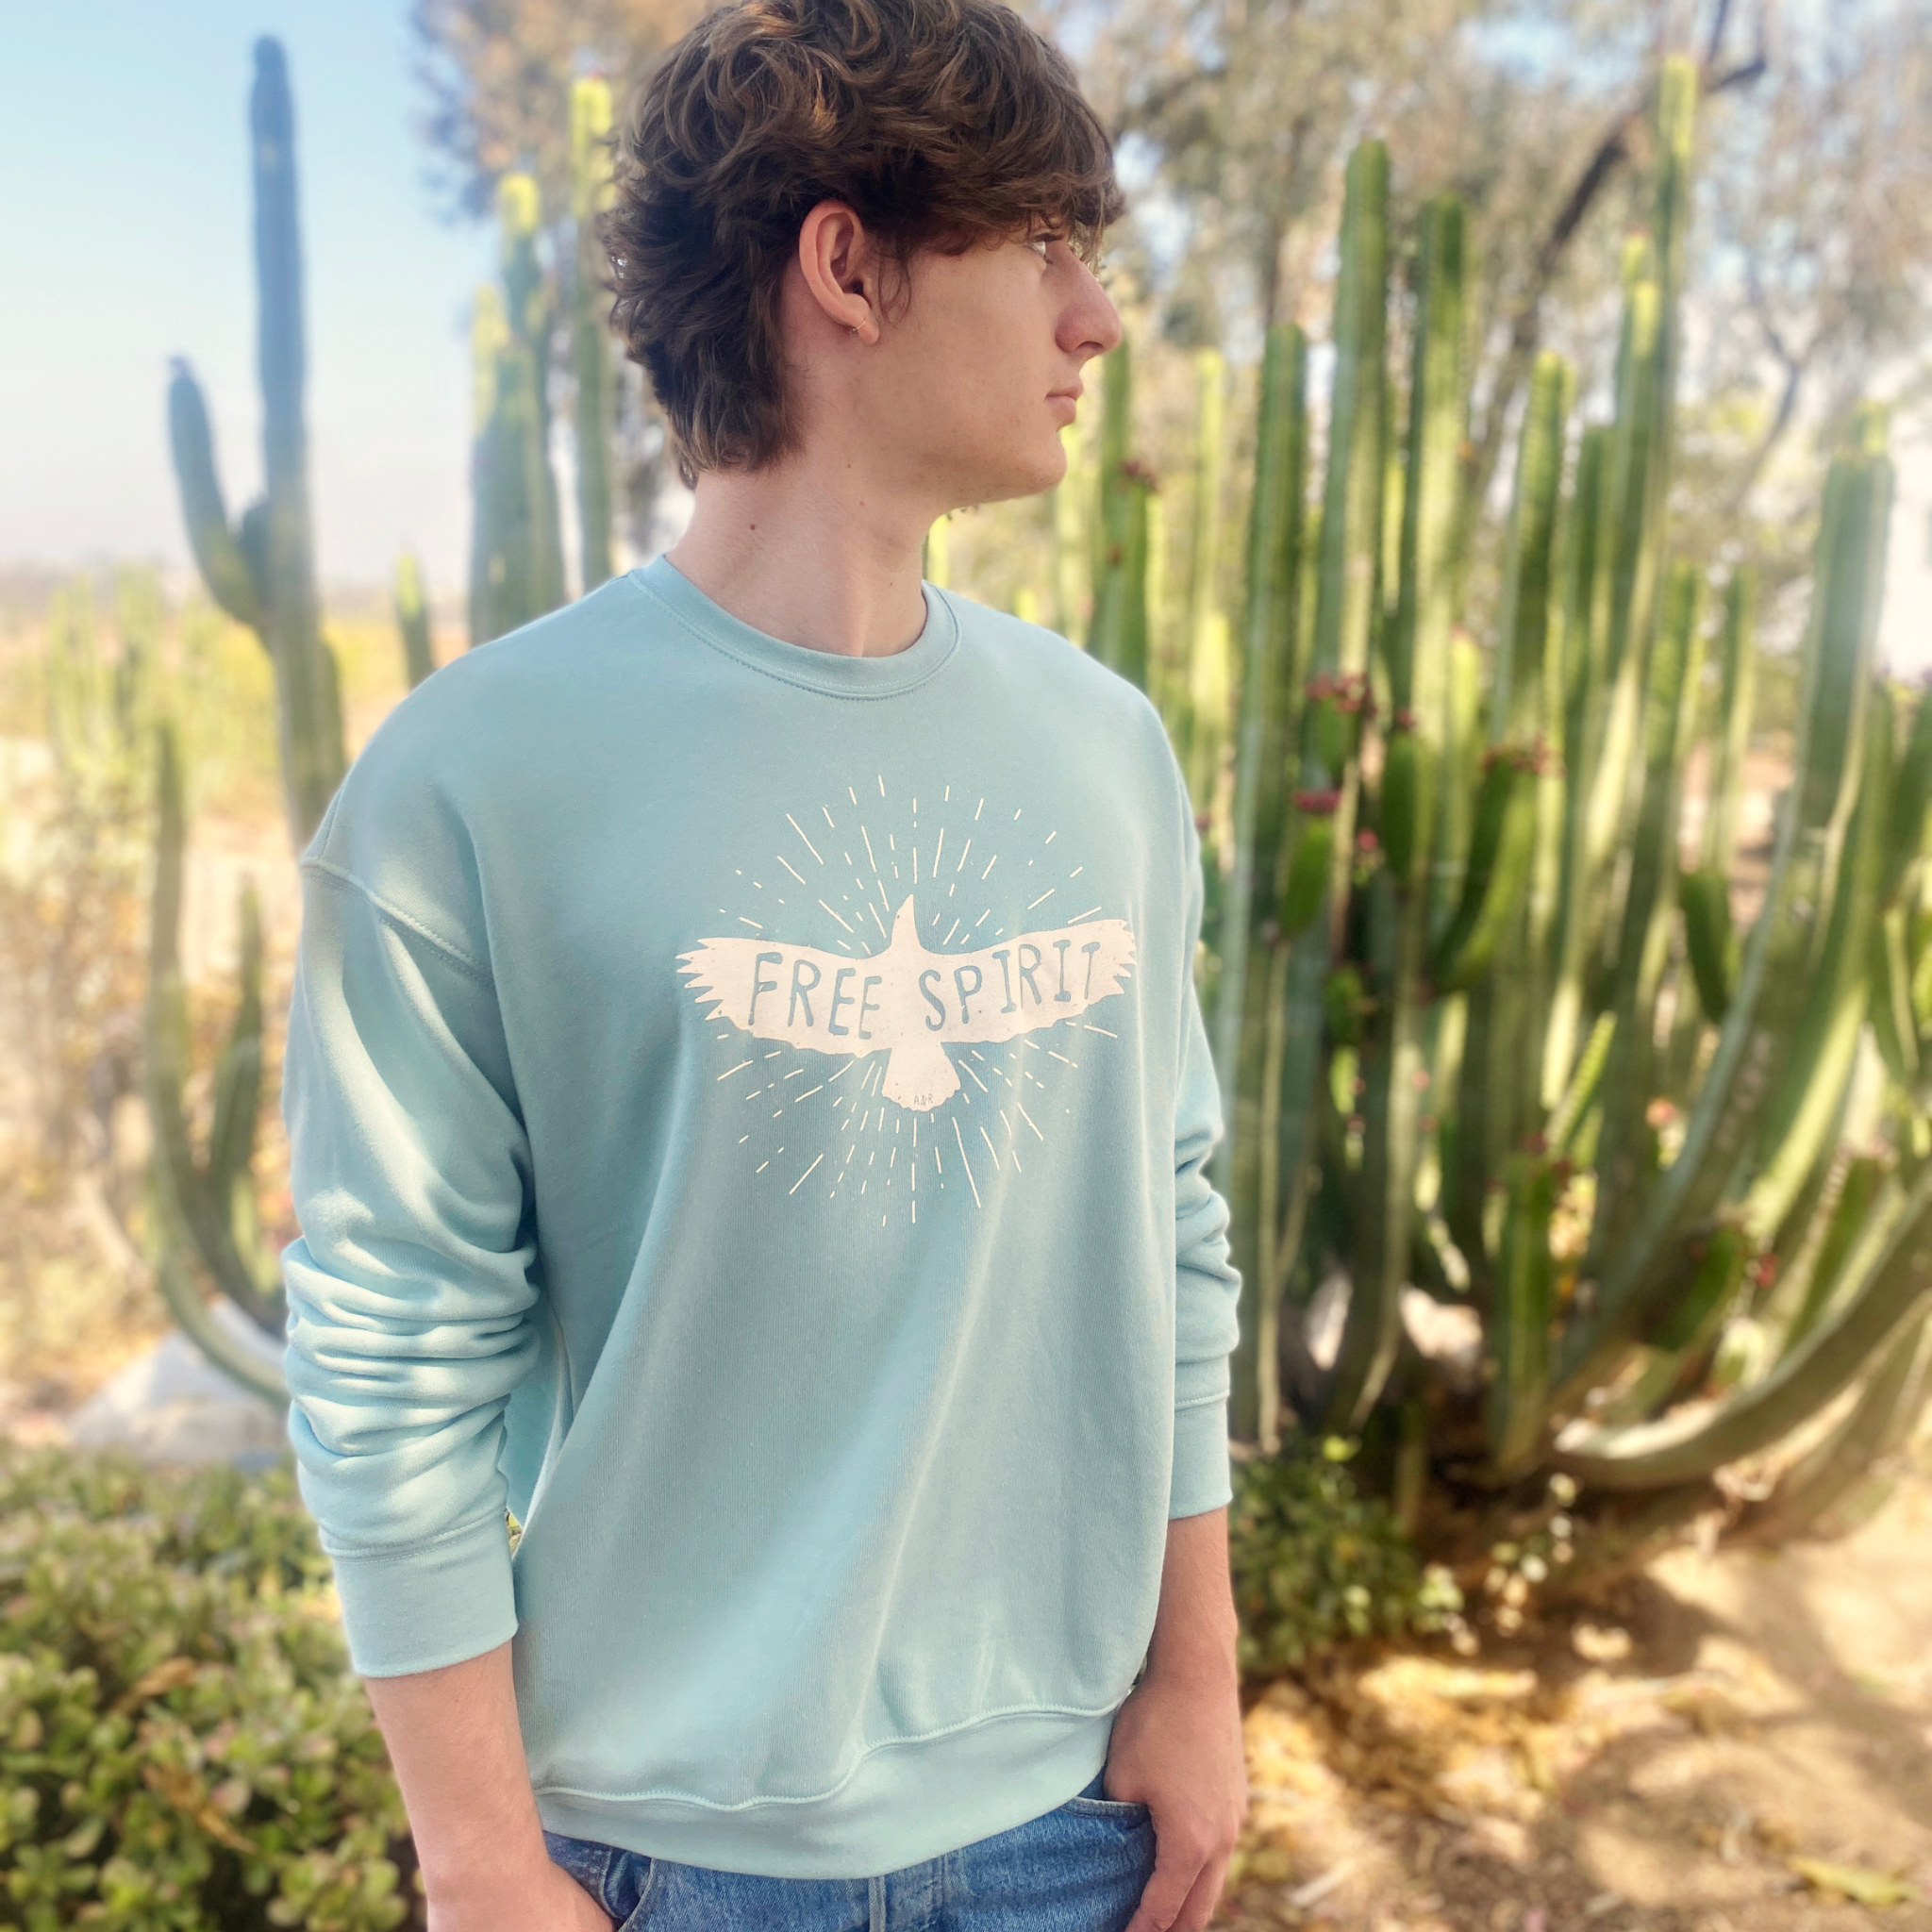 Man with light blue, long-sleeved sweatshirt that has a graphic of a soaring bird with the words "FREE SPIRIT" across its wings.